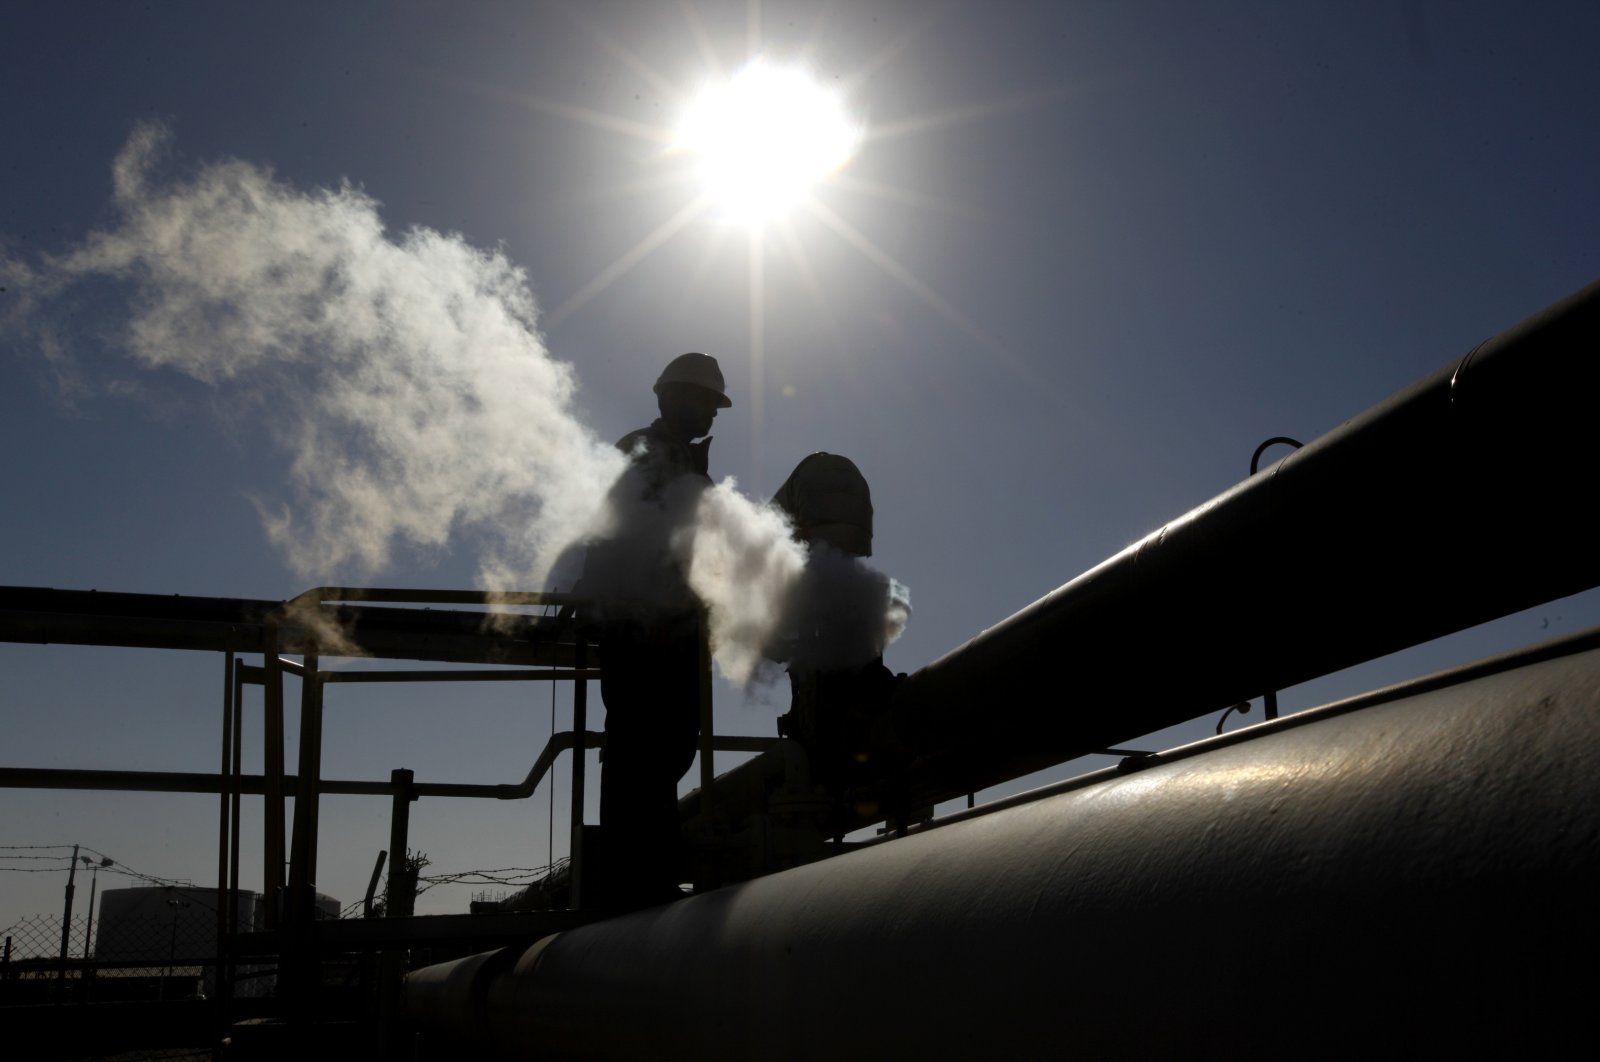 In this file photo, a Libyan oil worker, works at a refinery inside the Brega oil complex, in Brega, eastern Libya, Feb. 26, 2011. (AP File Photo)